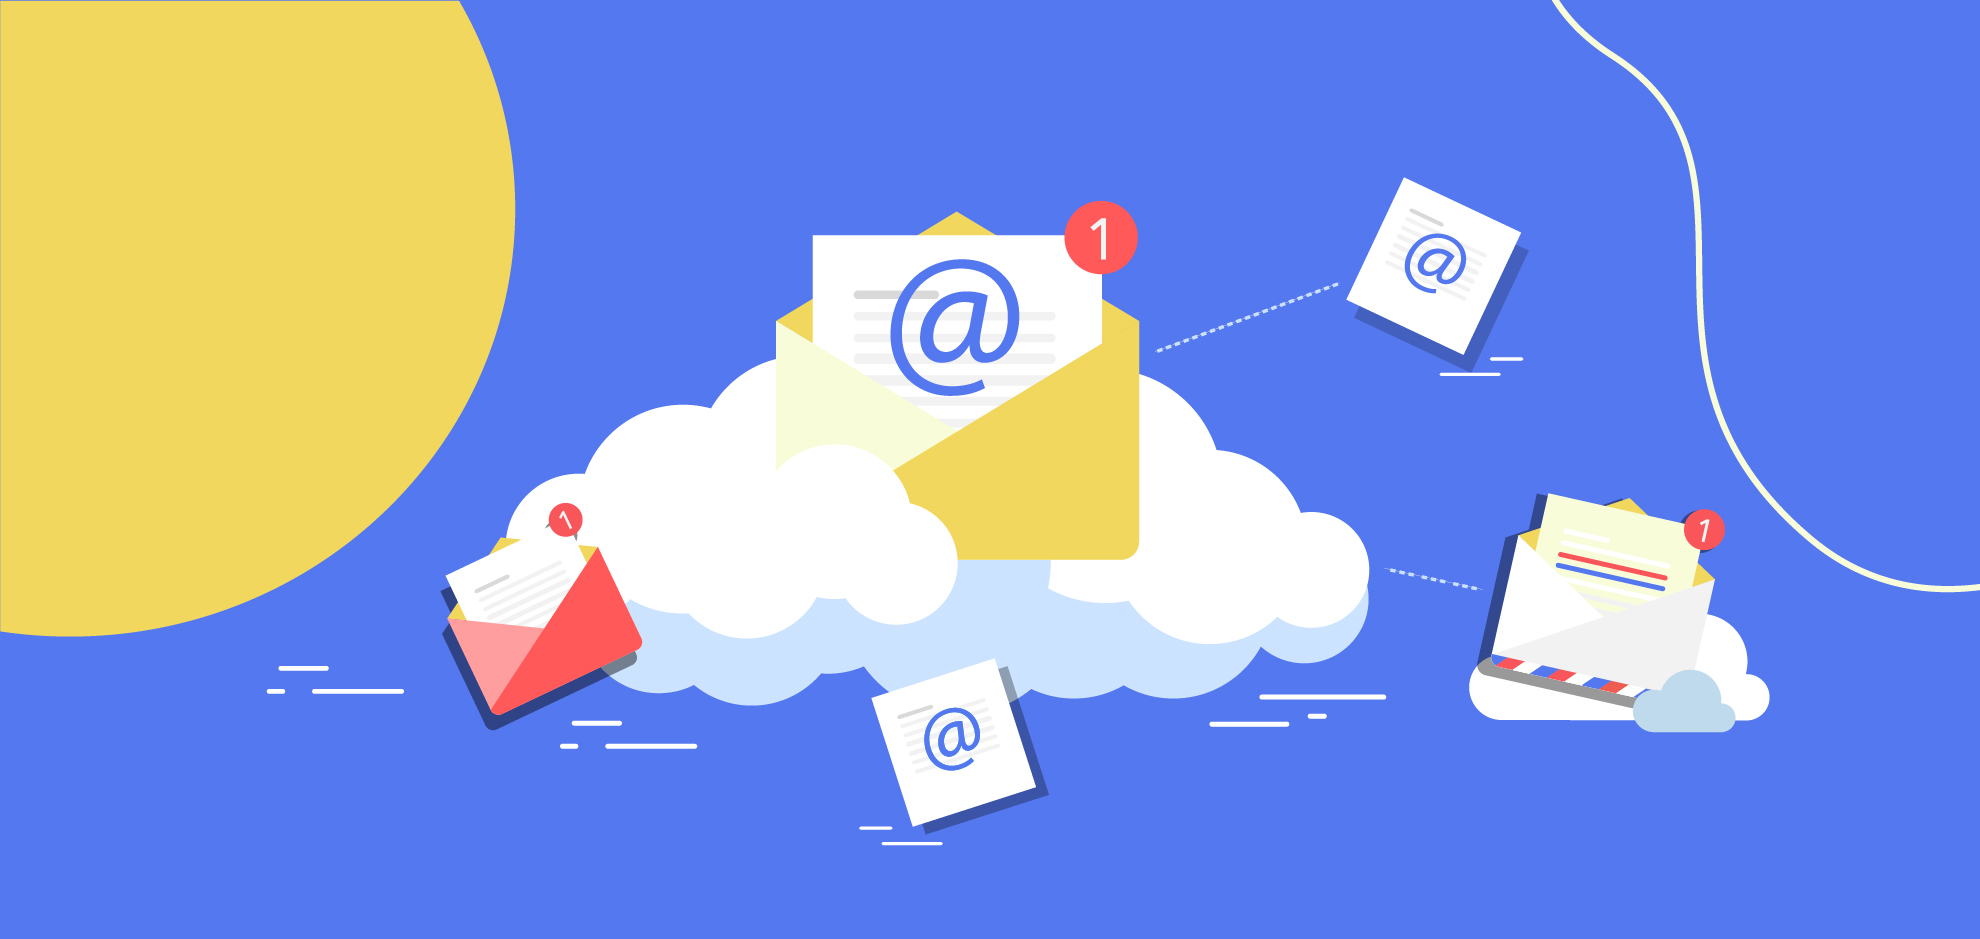 5 email infrastructure product development challenges